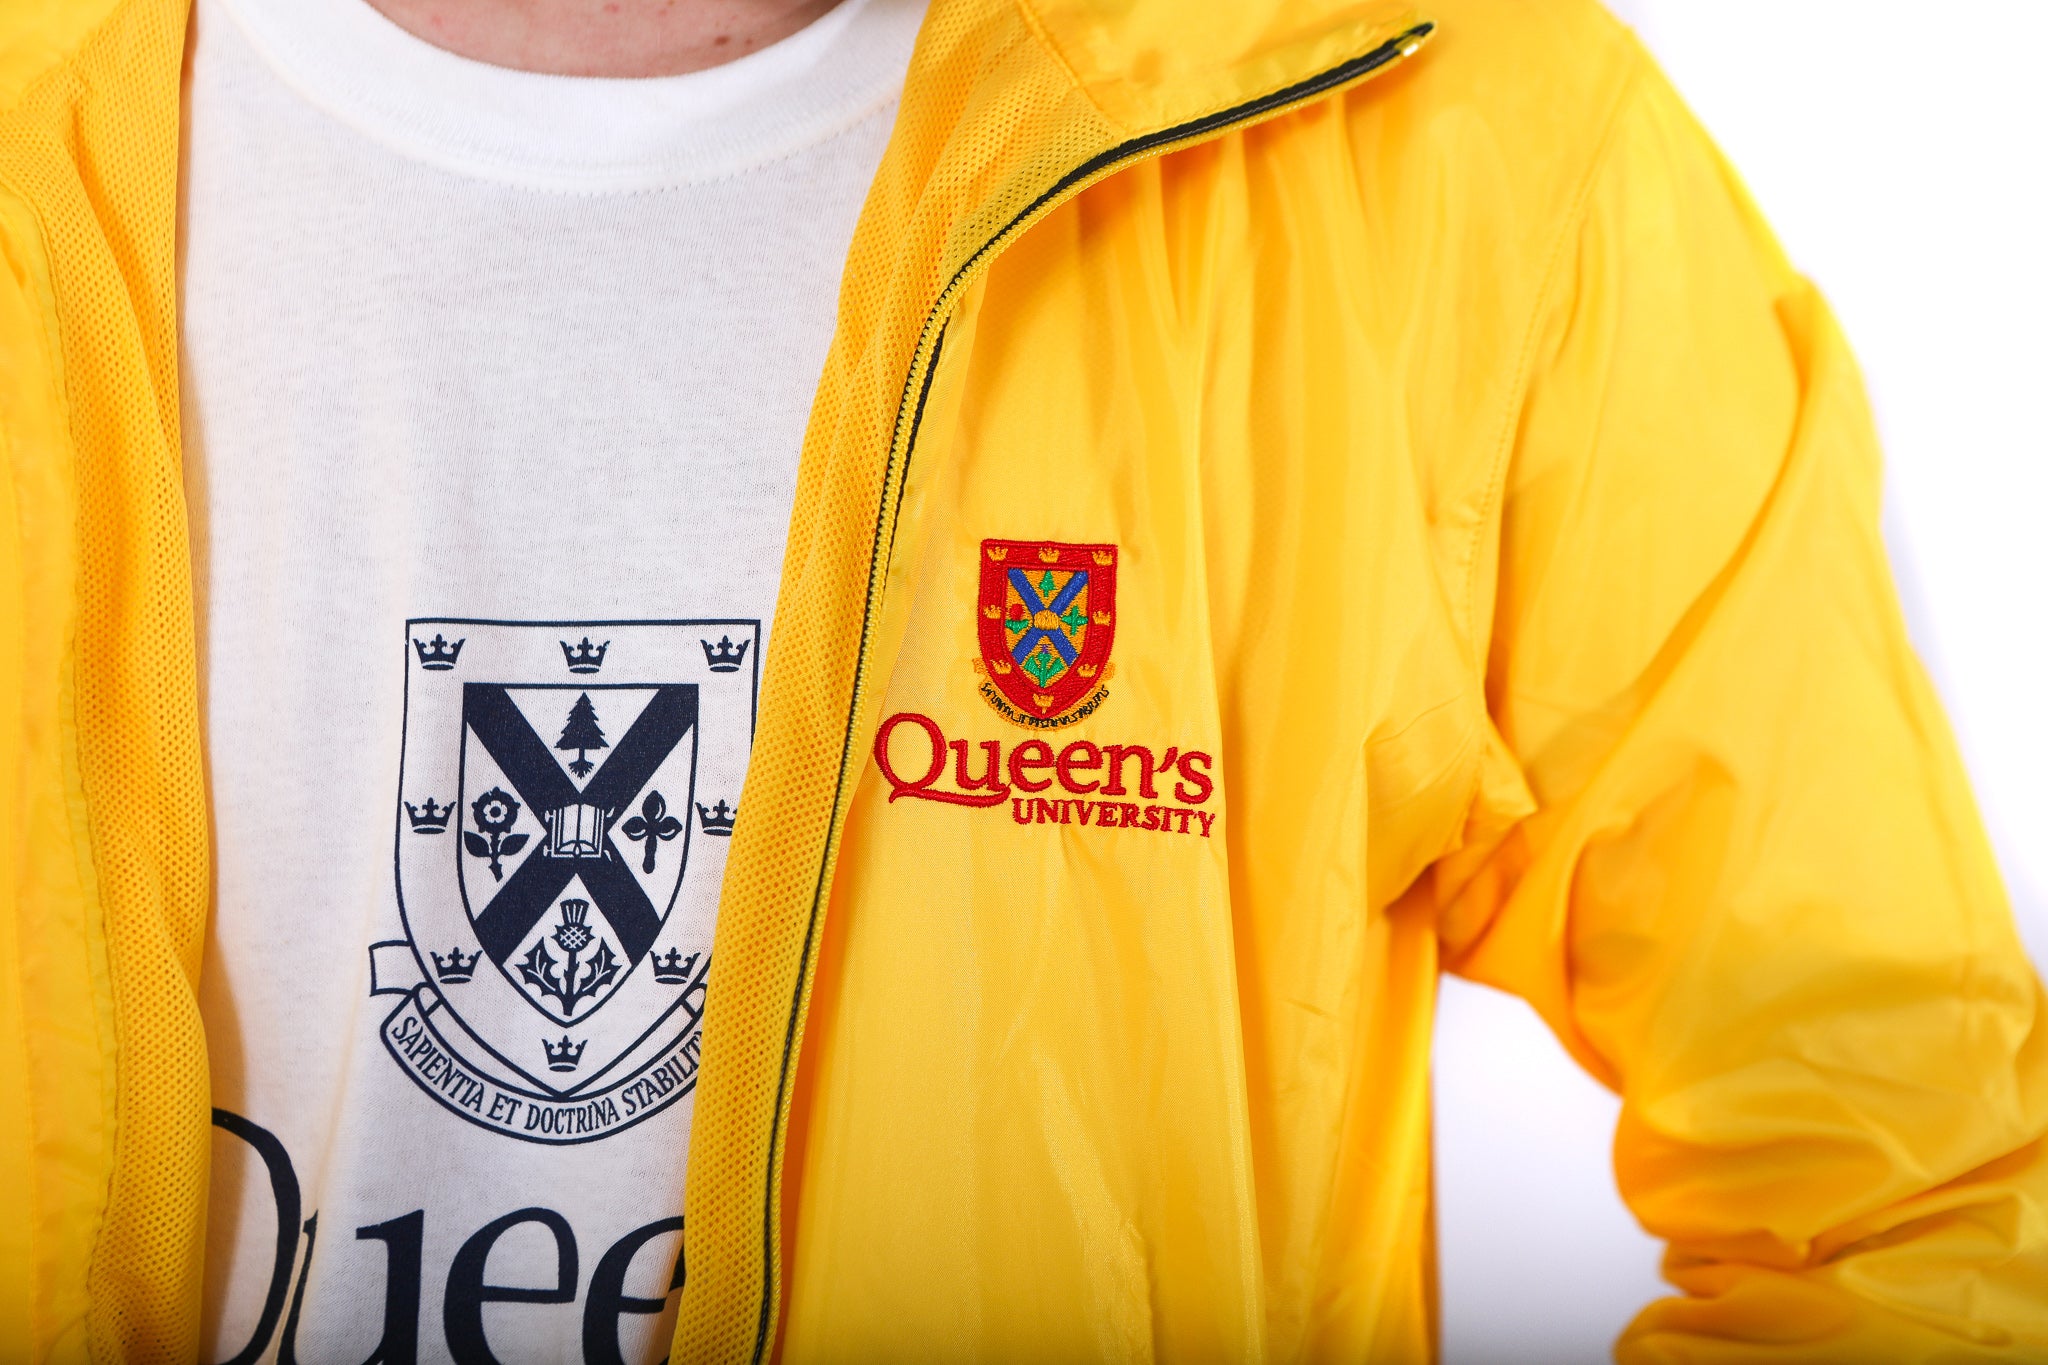 Close up of yellow zip up rain jacket with red Queen's crest logo